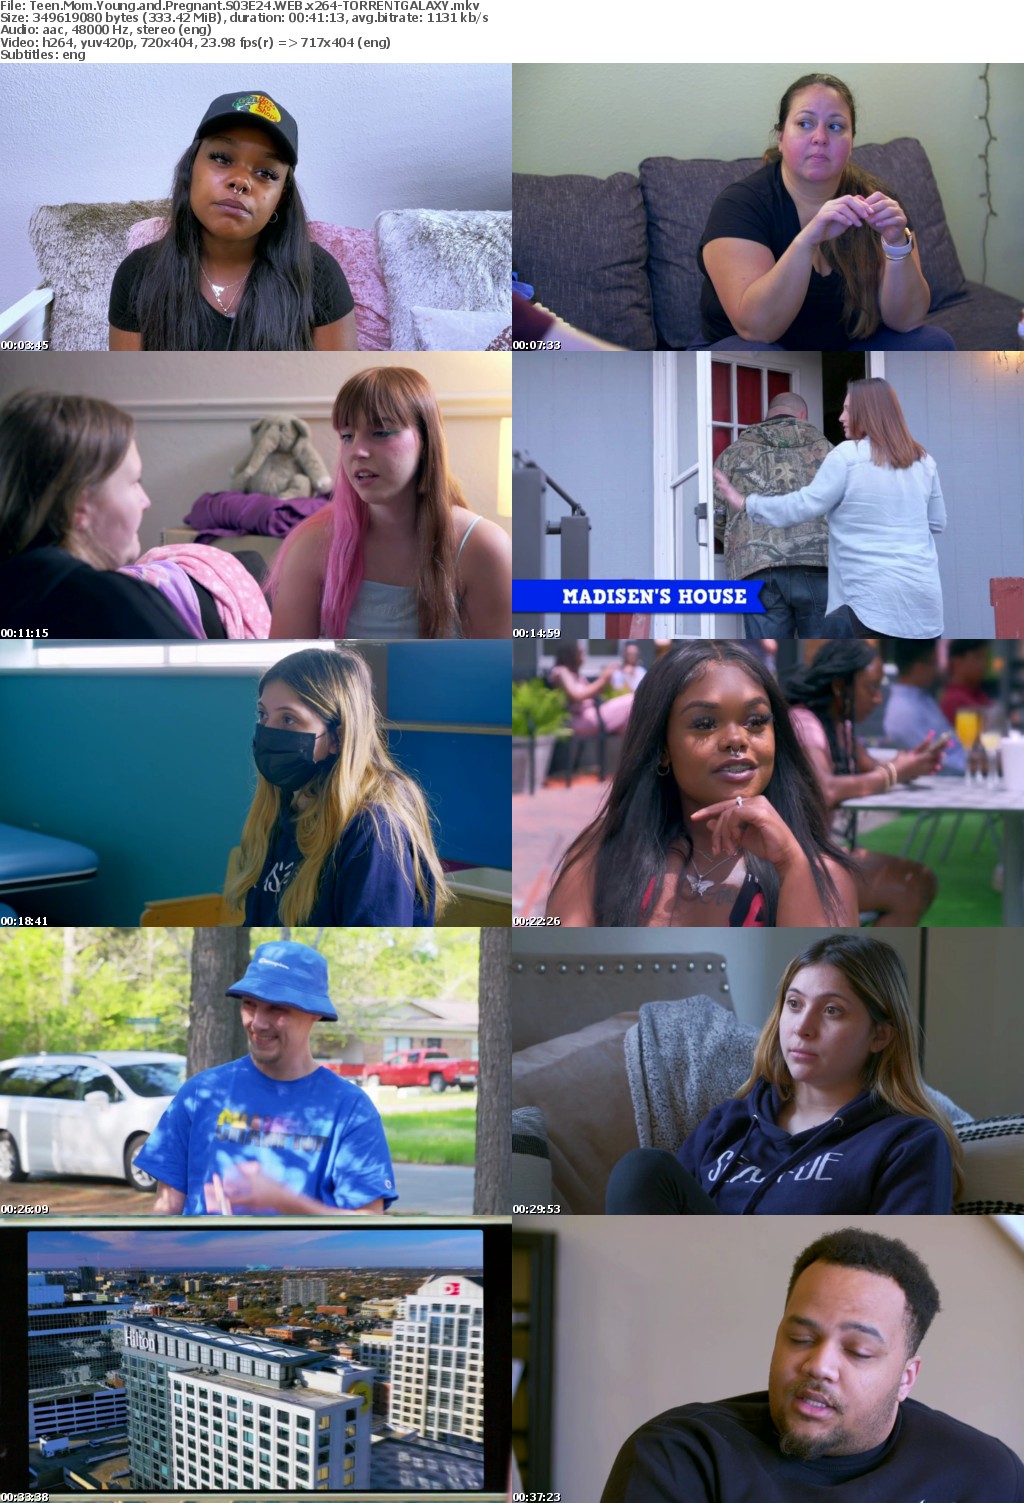 Teen Mom Young and Pregnant S03E24 WEB x264-GALAXY